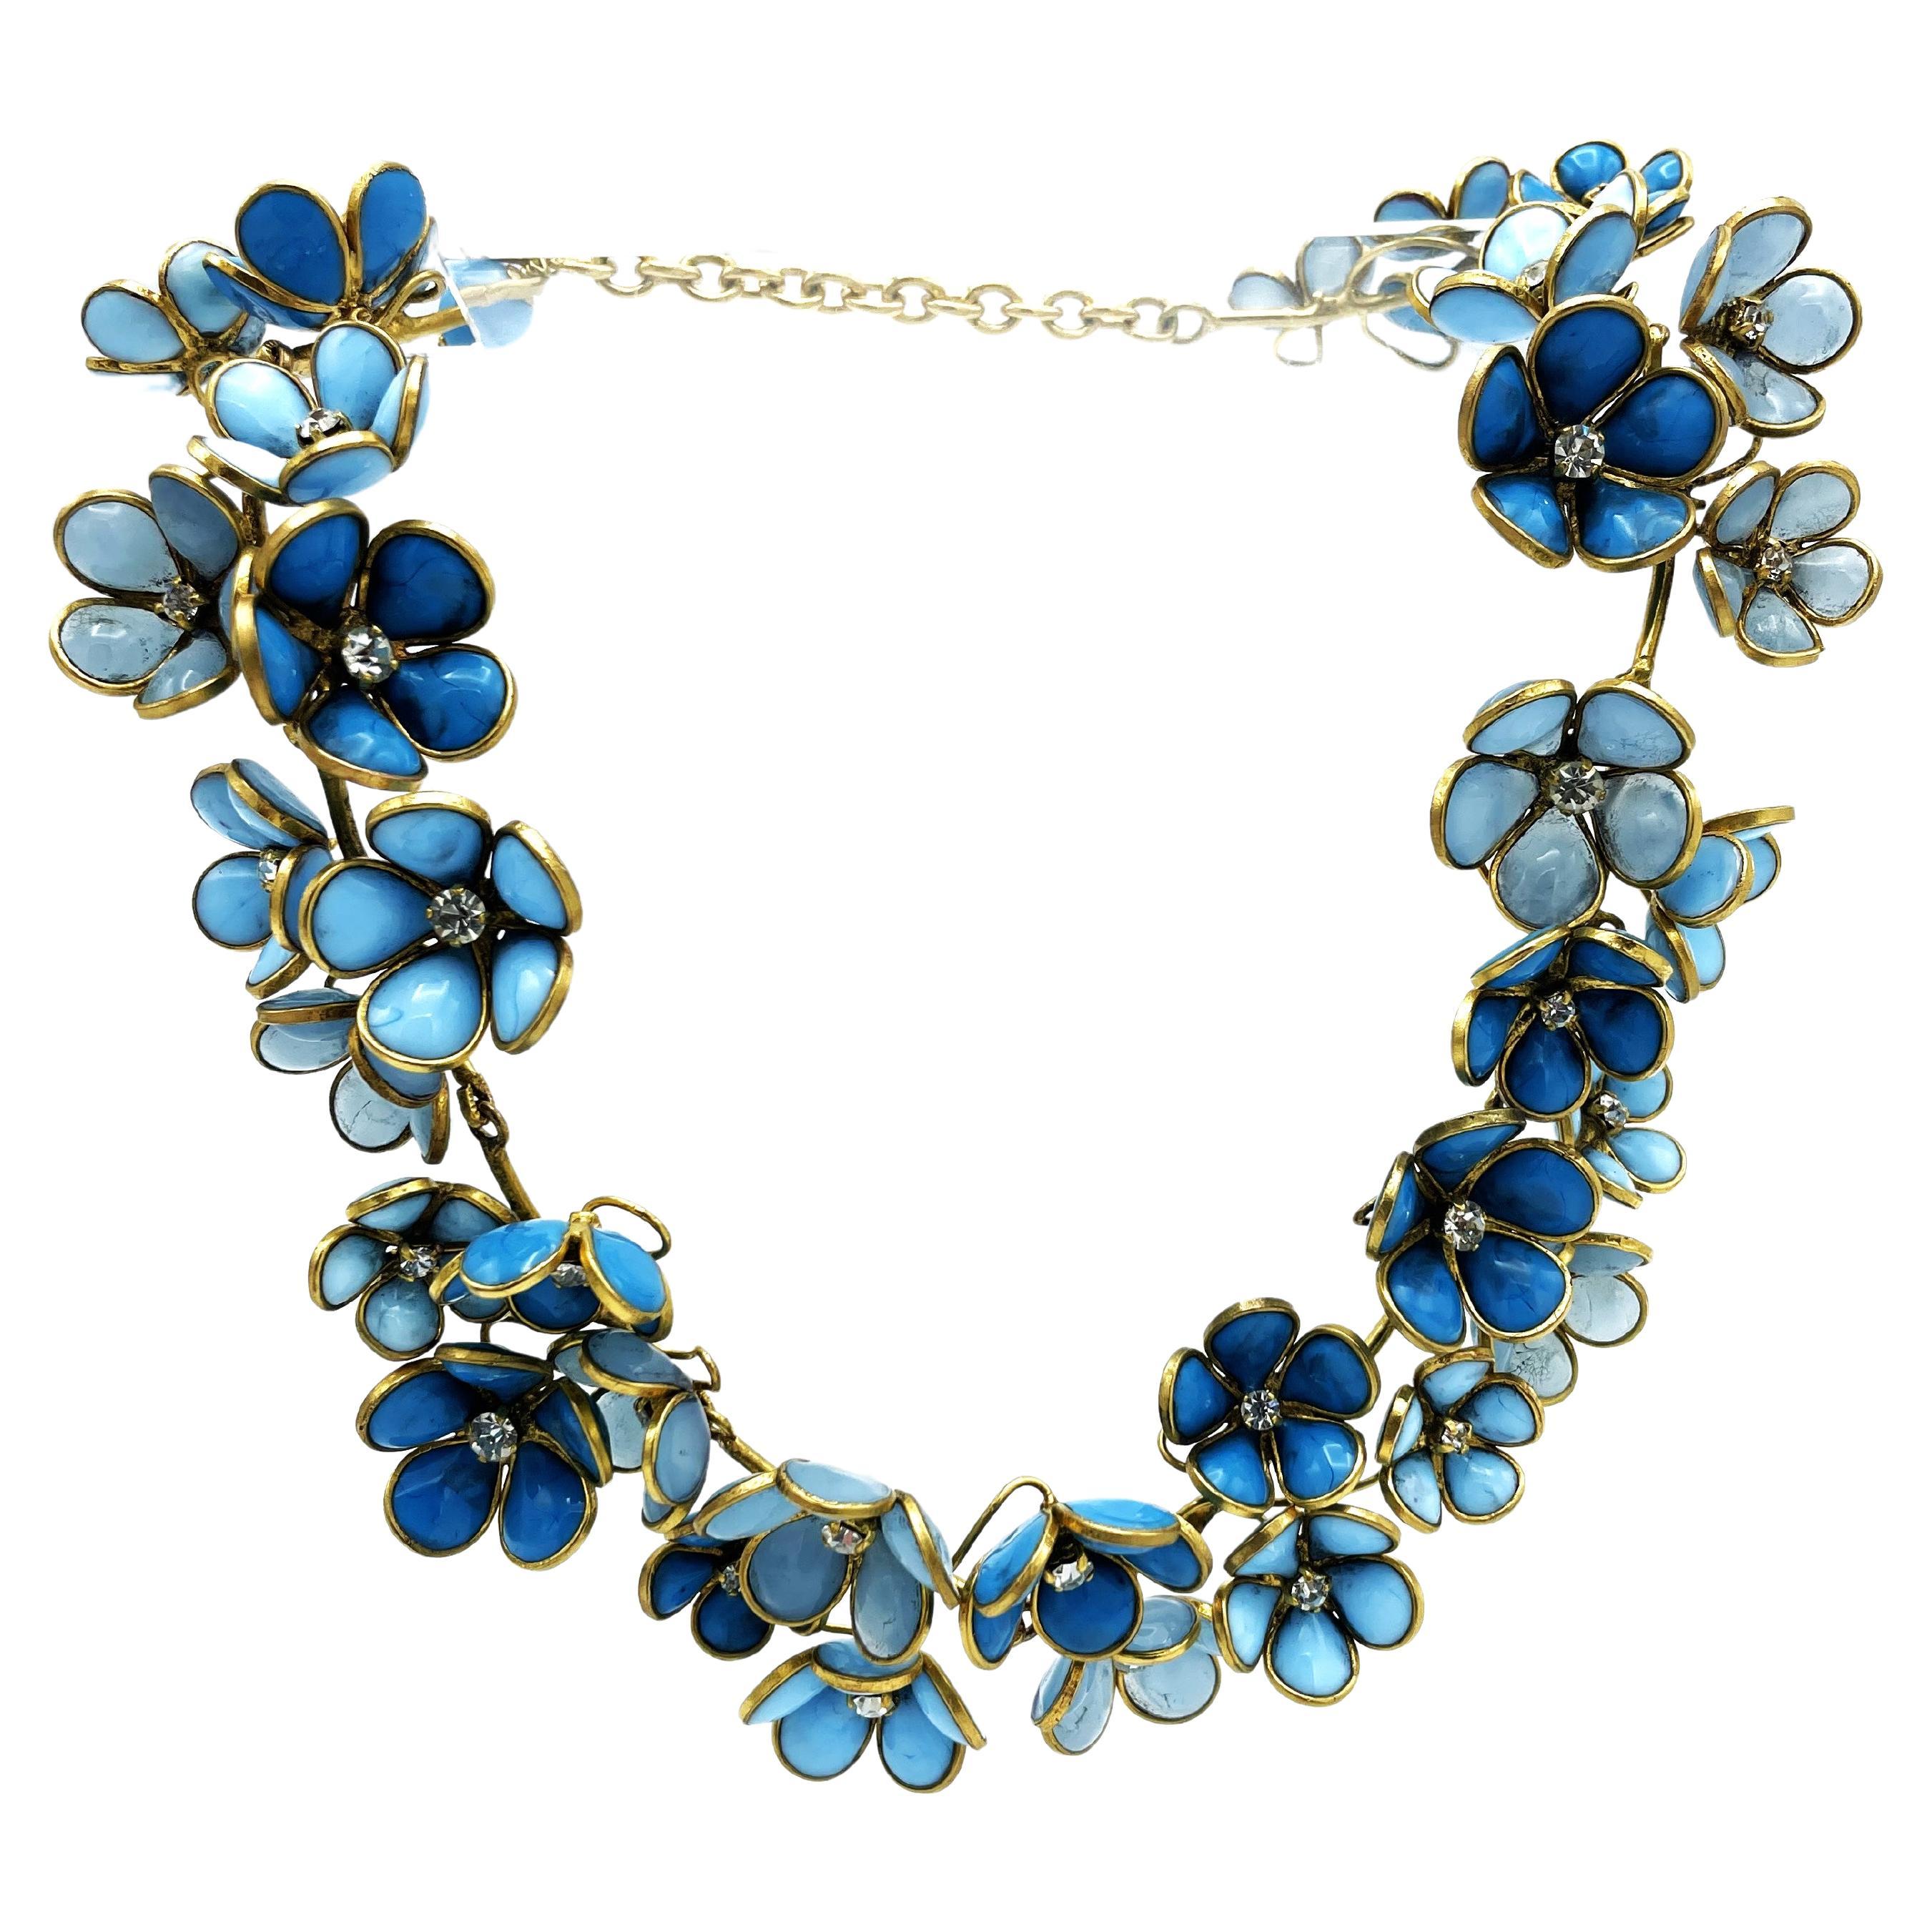 A very special necklace in the CHANEL style, consisting of many small Gripoix flowers in different shades of blue, with a small rhinestone stone in the middle.
The necklace consists of 11 metal joints to which the individual flowers are attached.